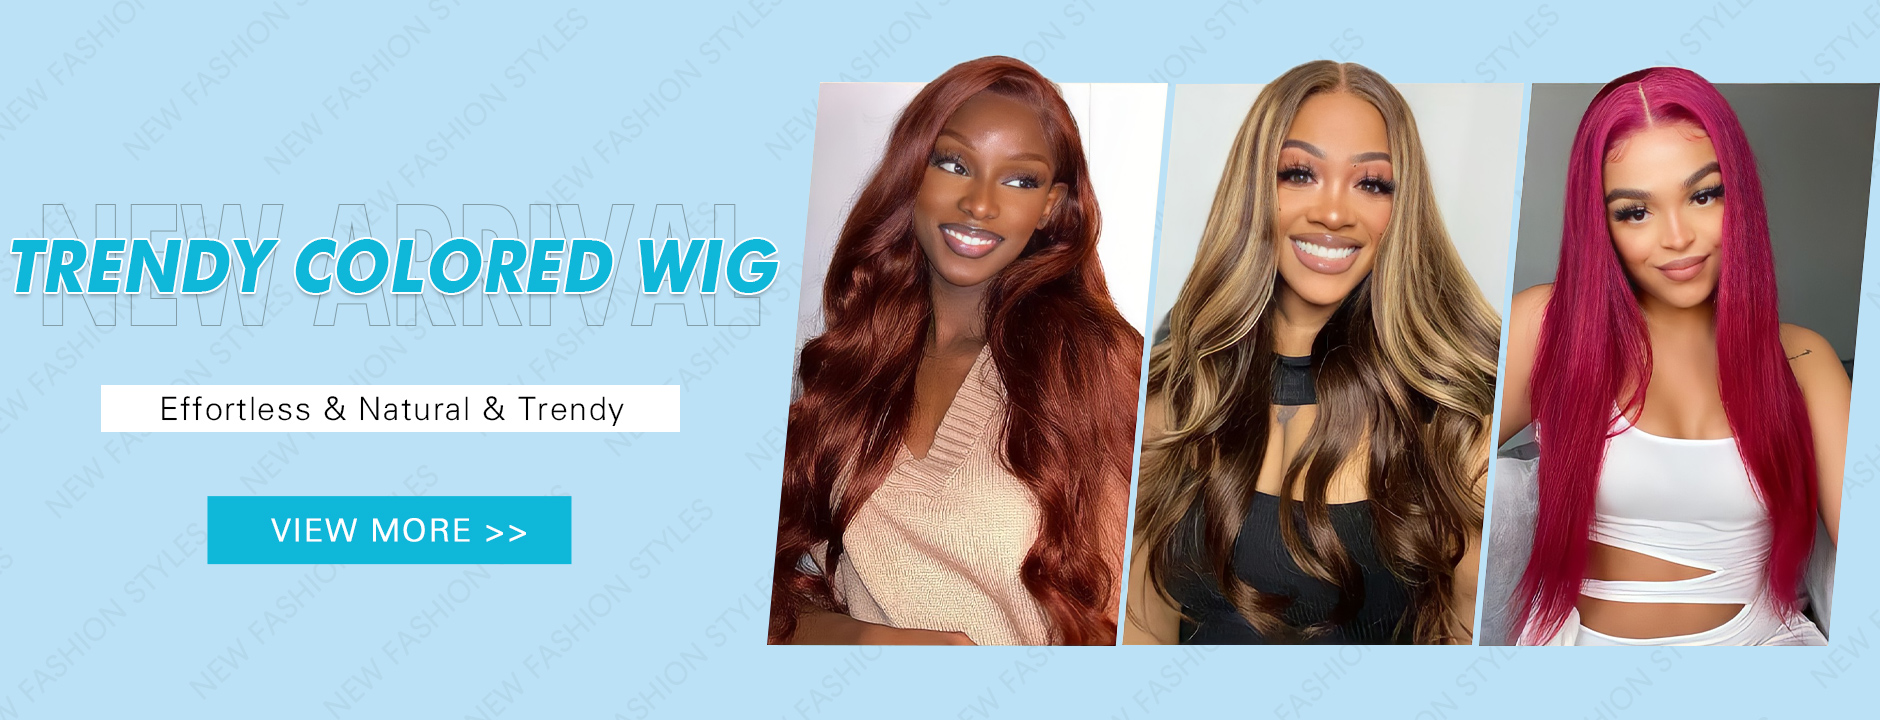 lwigs, new arrival, trendy, hd lace, hd lace wigs, lace wig, invisible hd lace